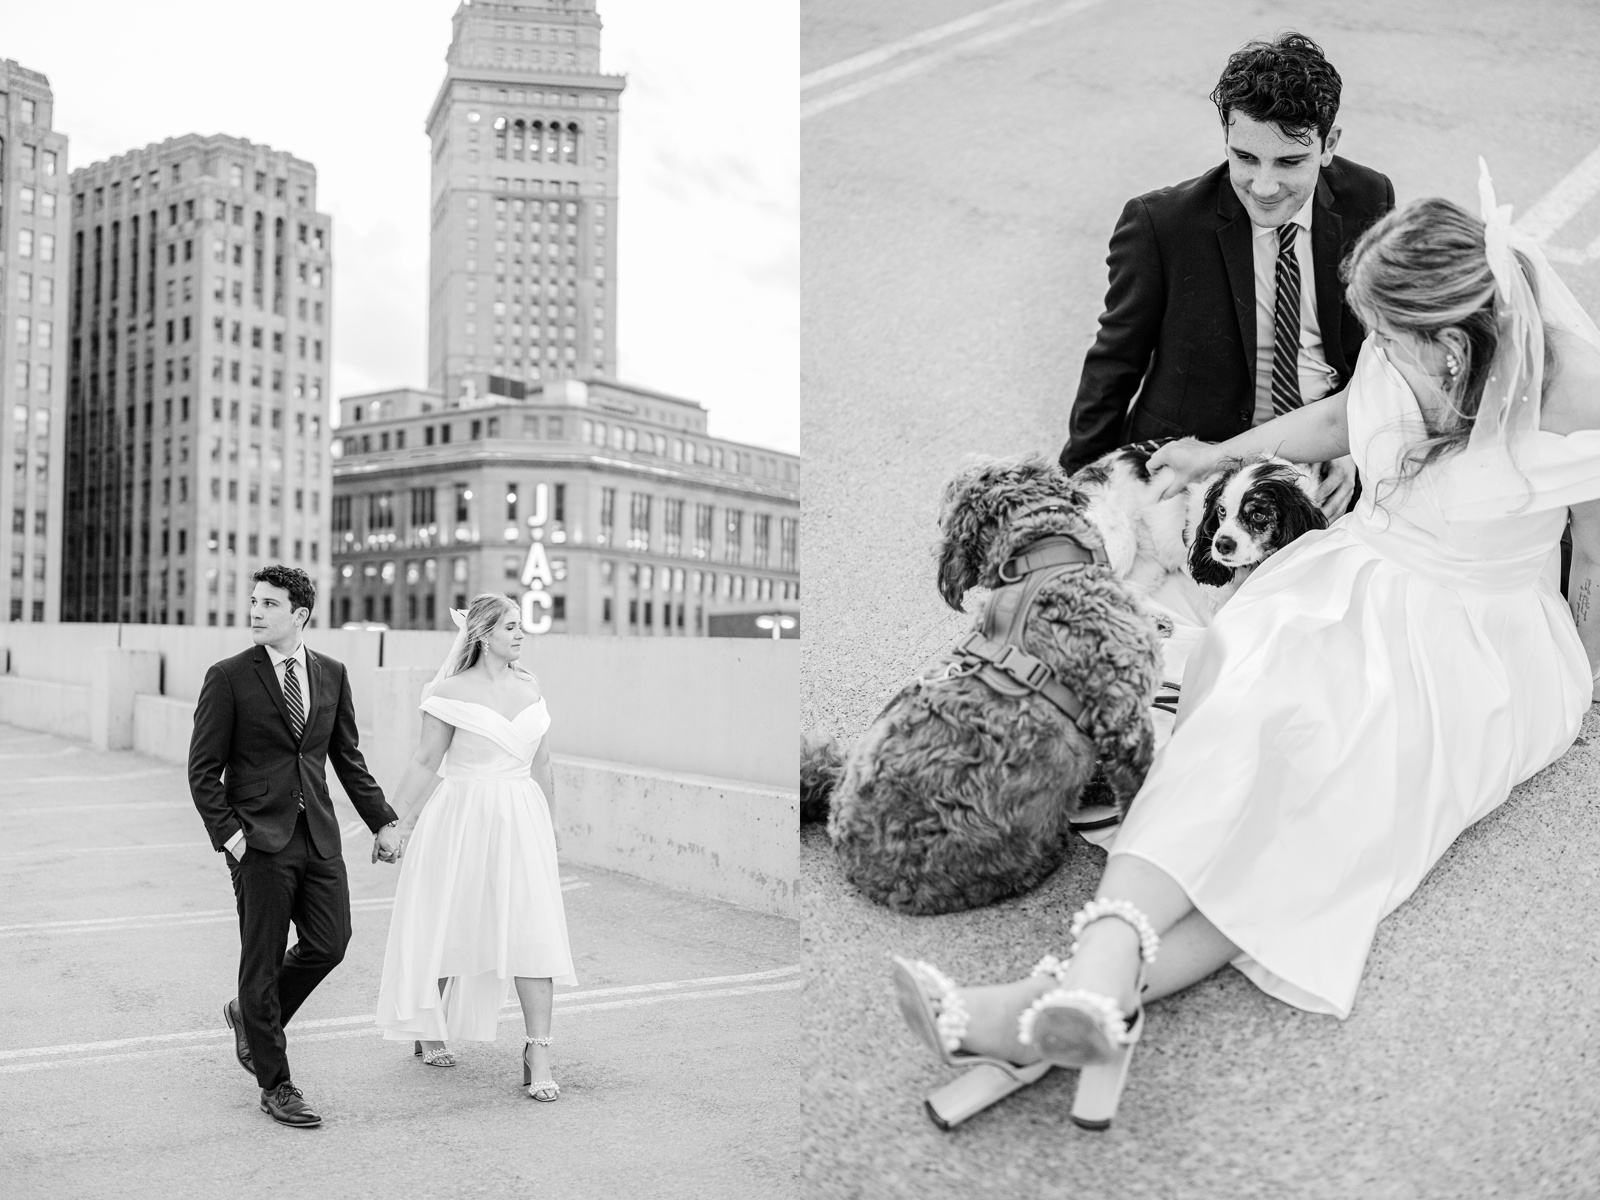 Cleveland Museum of Art and Cleveland OH Downtown Rooftop Engagement Session